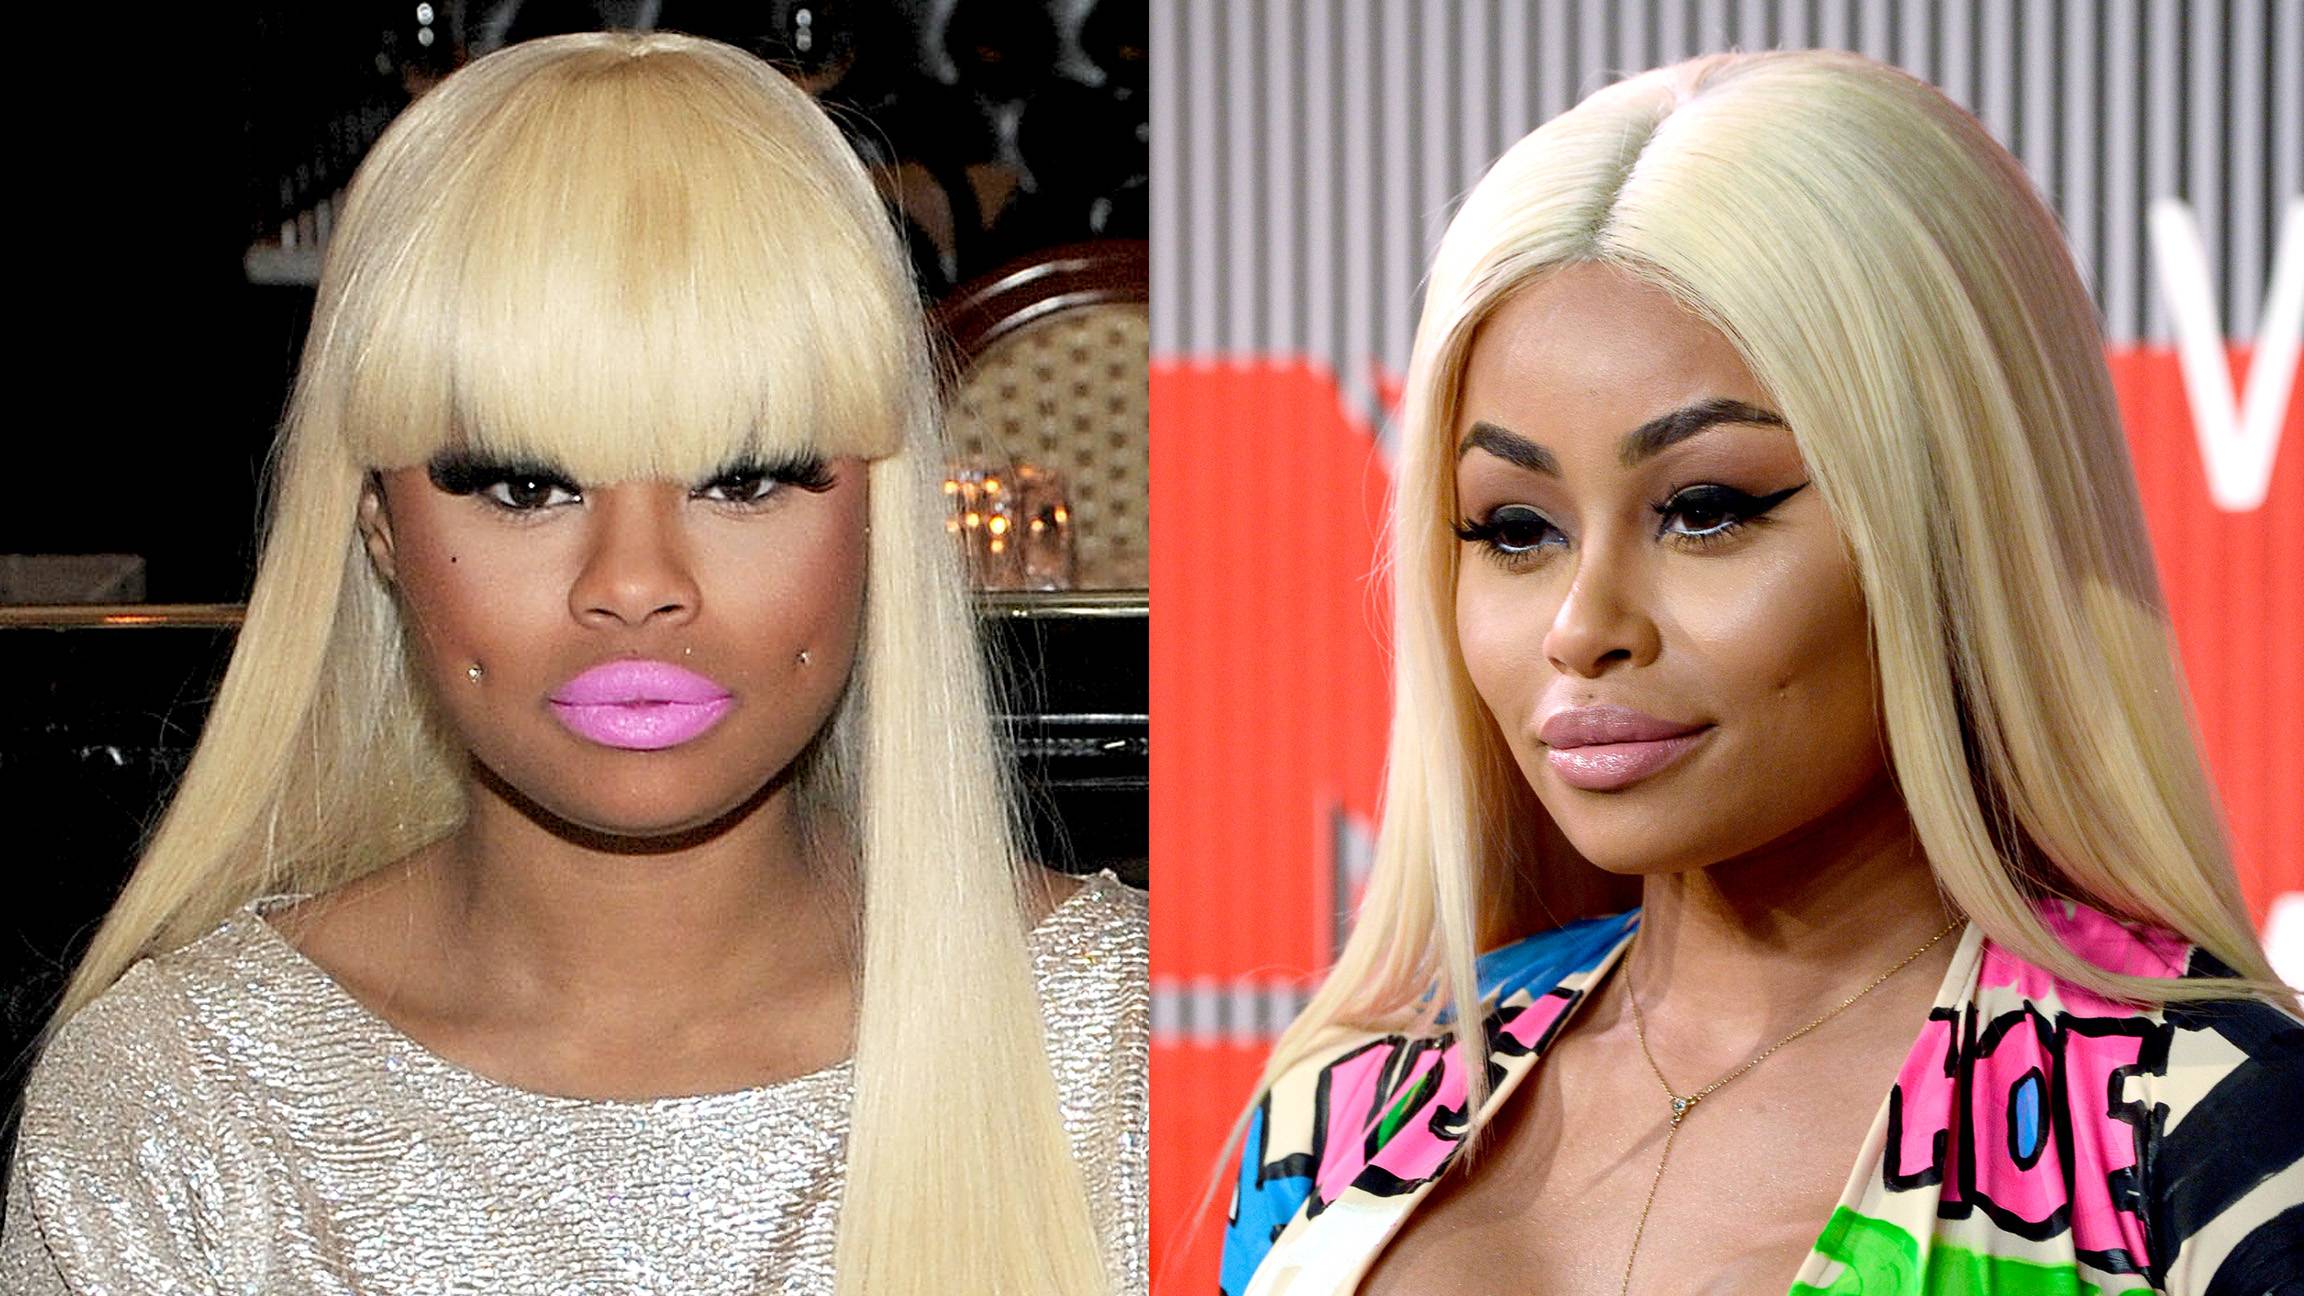 Blac Chyna The Image 7 From 10 Celebs Who Have Been Accused Of